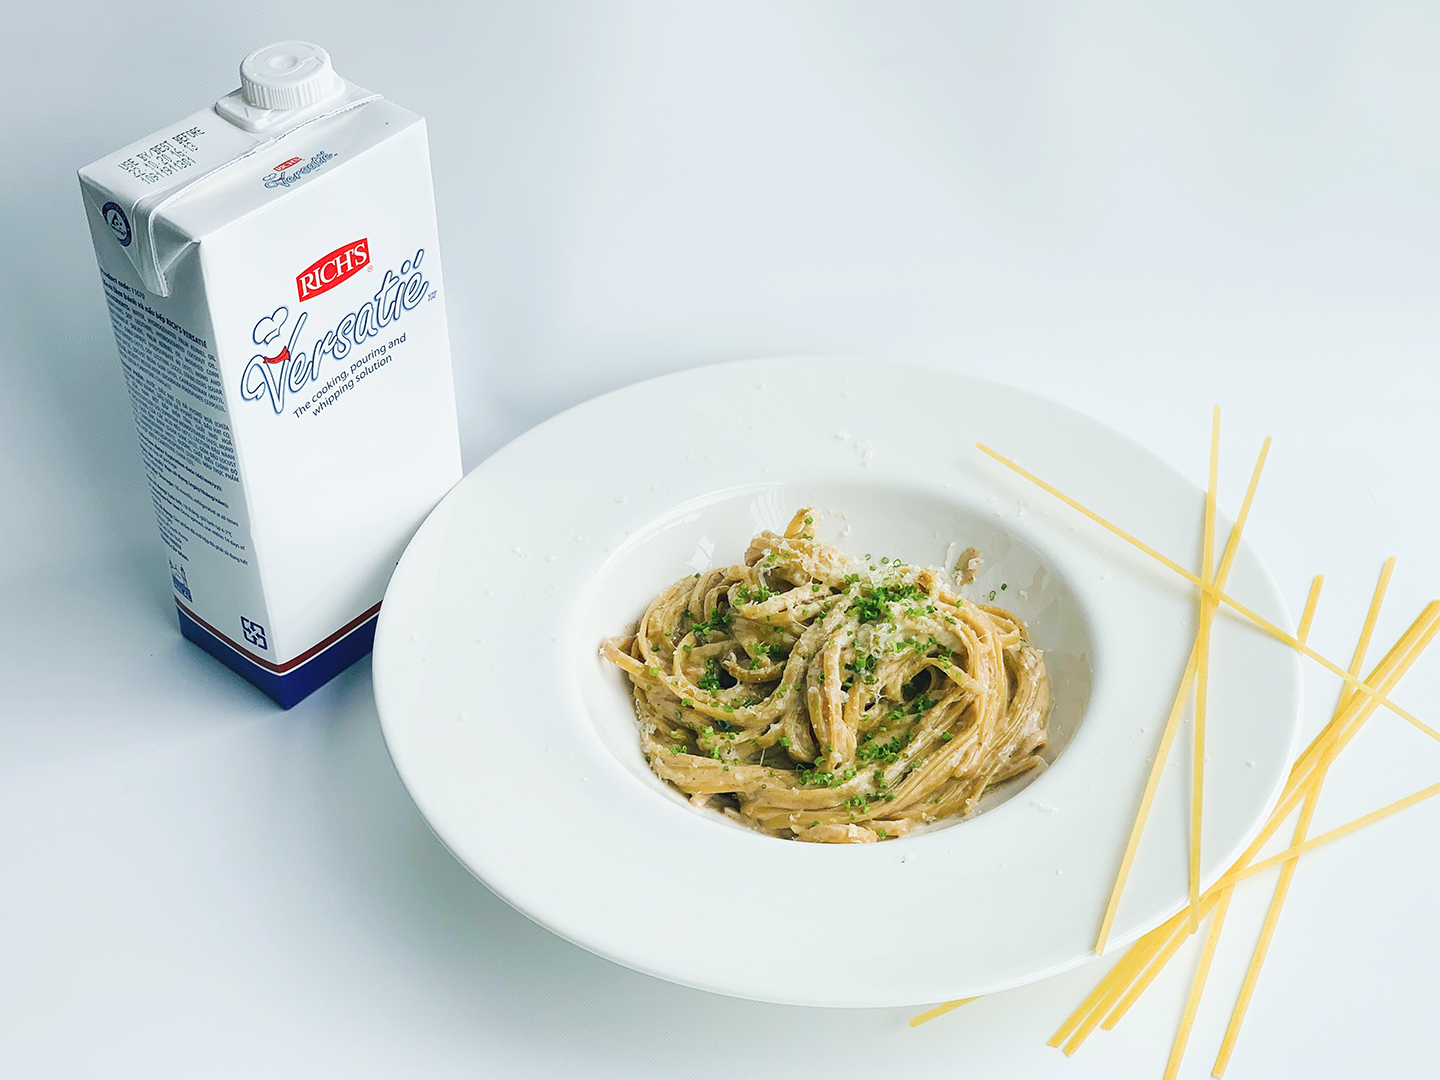 Rich’s Versatié™'s thicker consistency provides a superior and even coating for pasta and spaghetti.